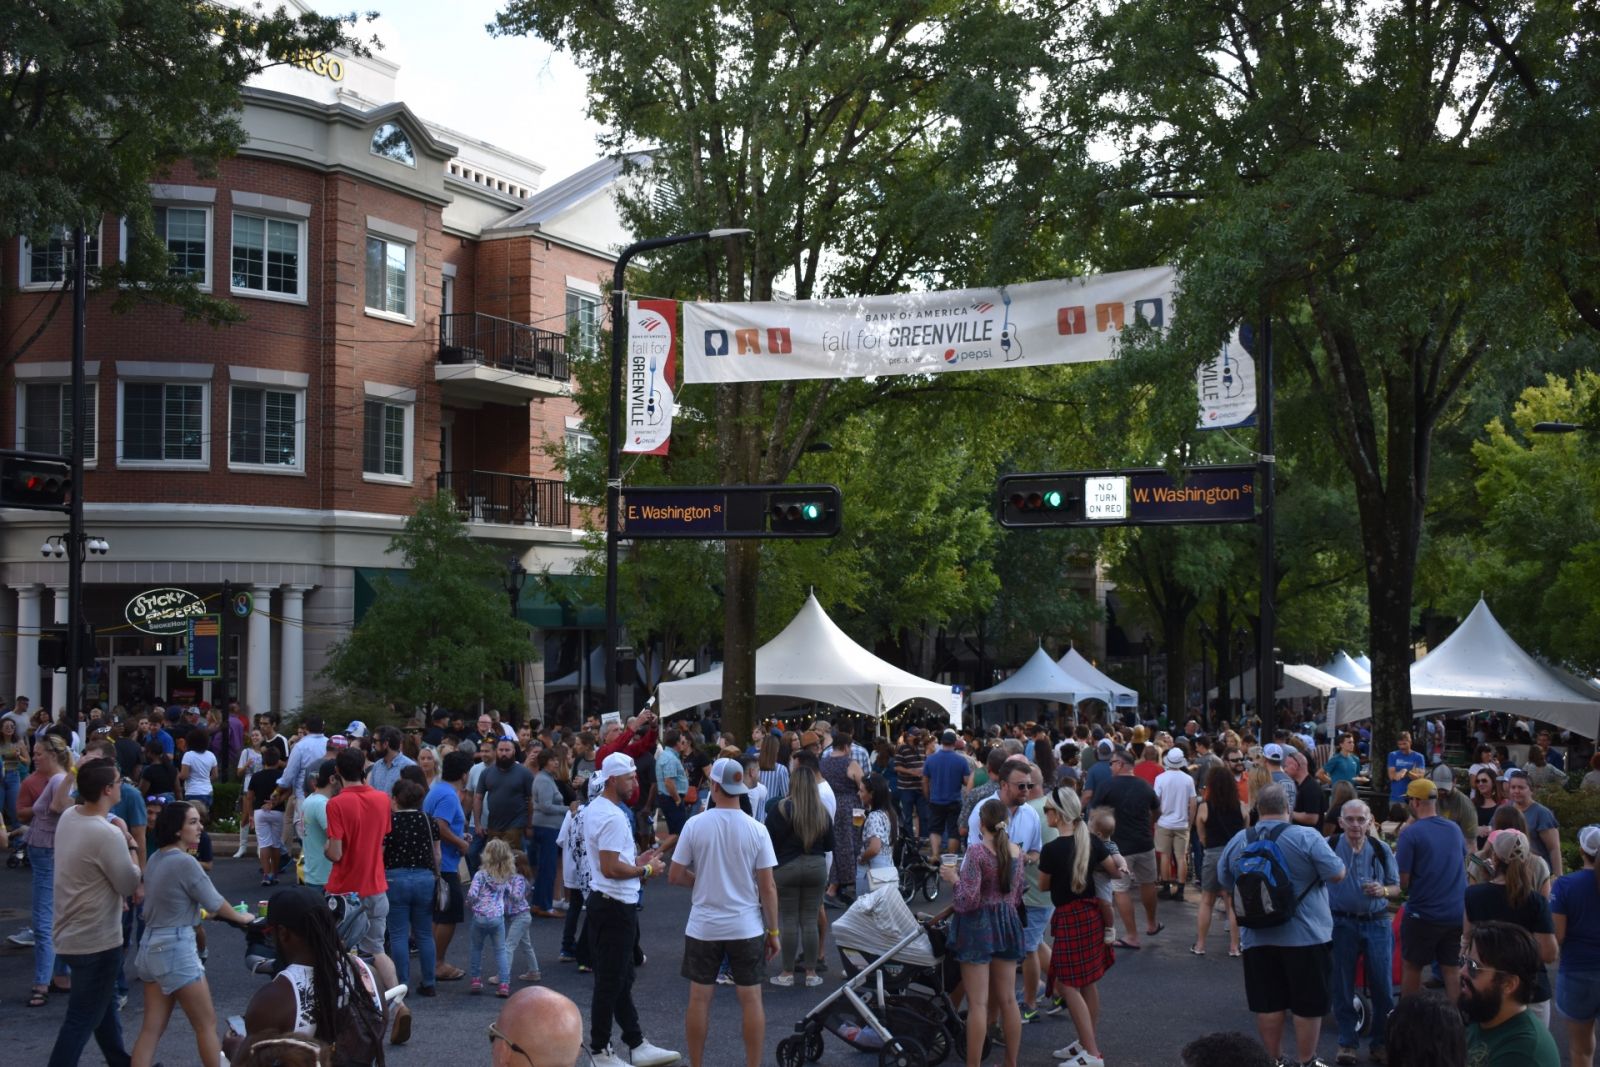 The festival attracted almost 50 restaurants and more than 70 bands to the streets. (Photo/Molly Hulsey)